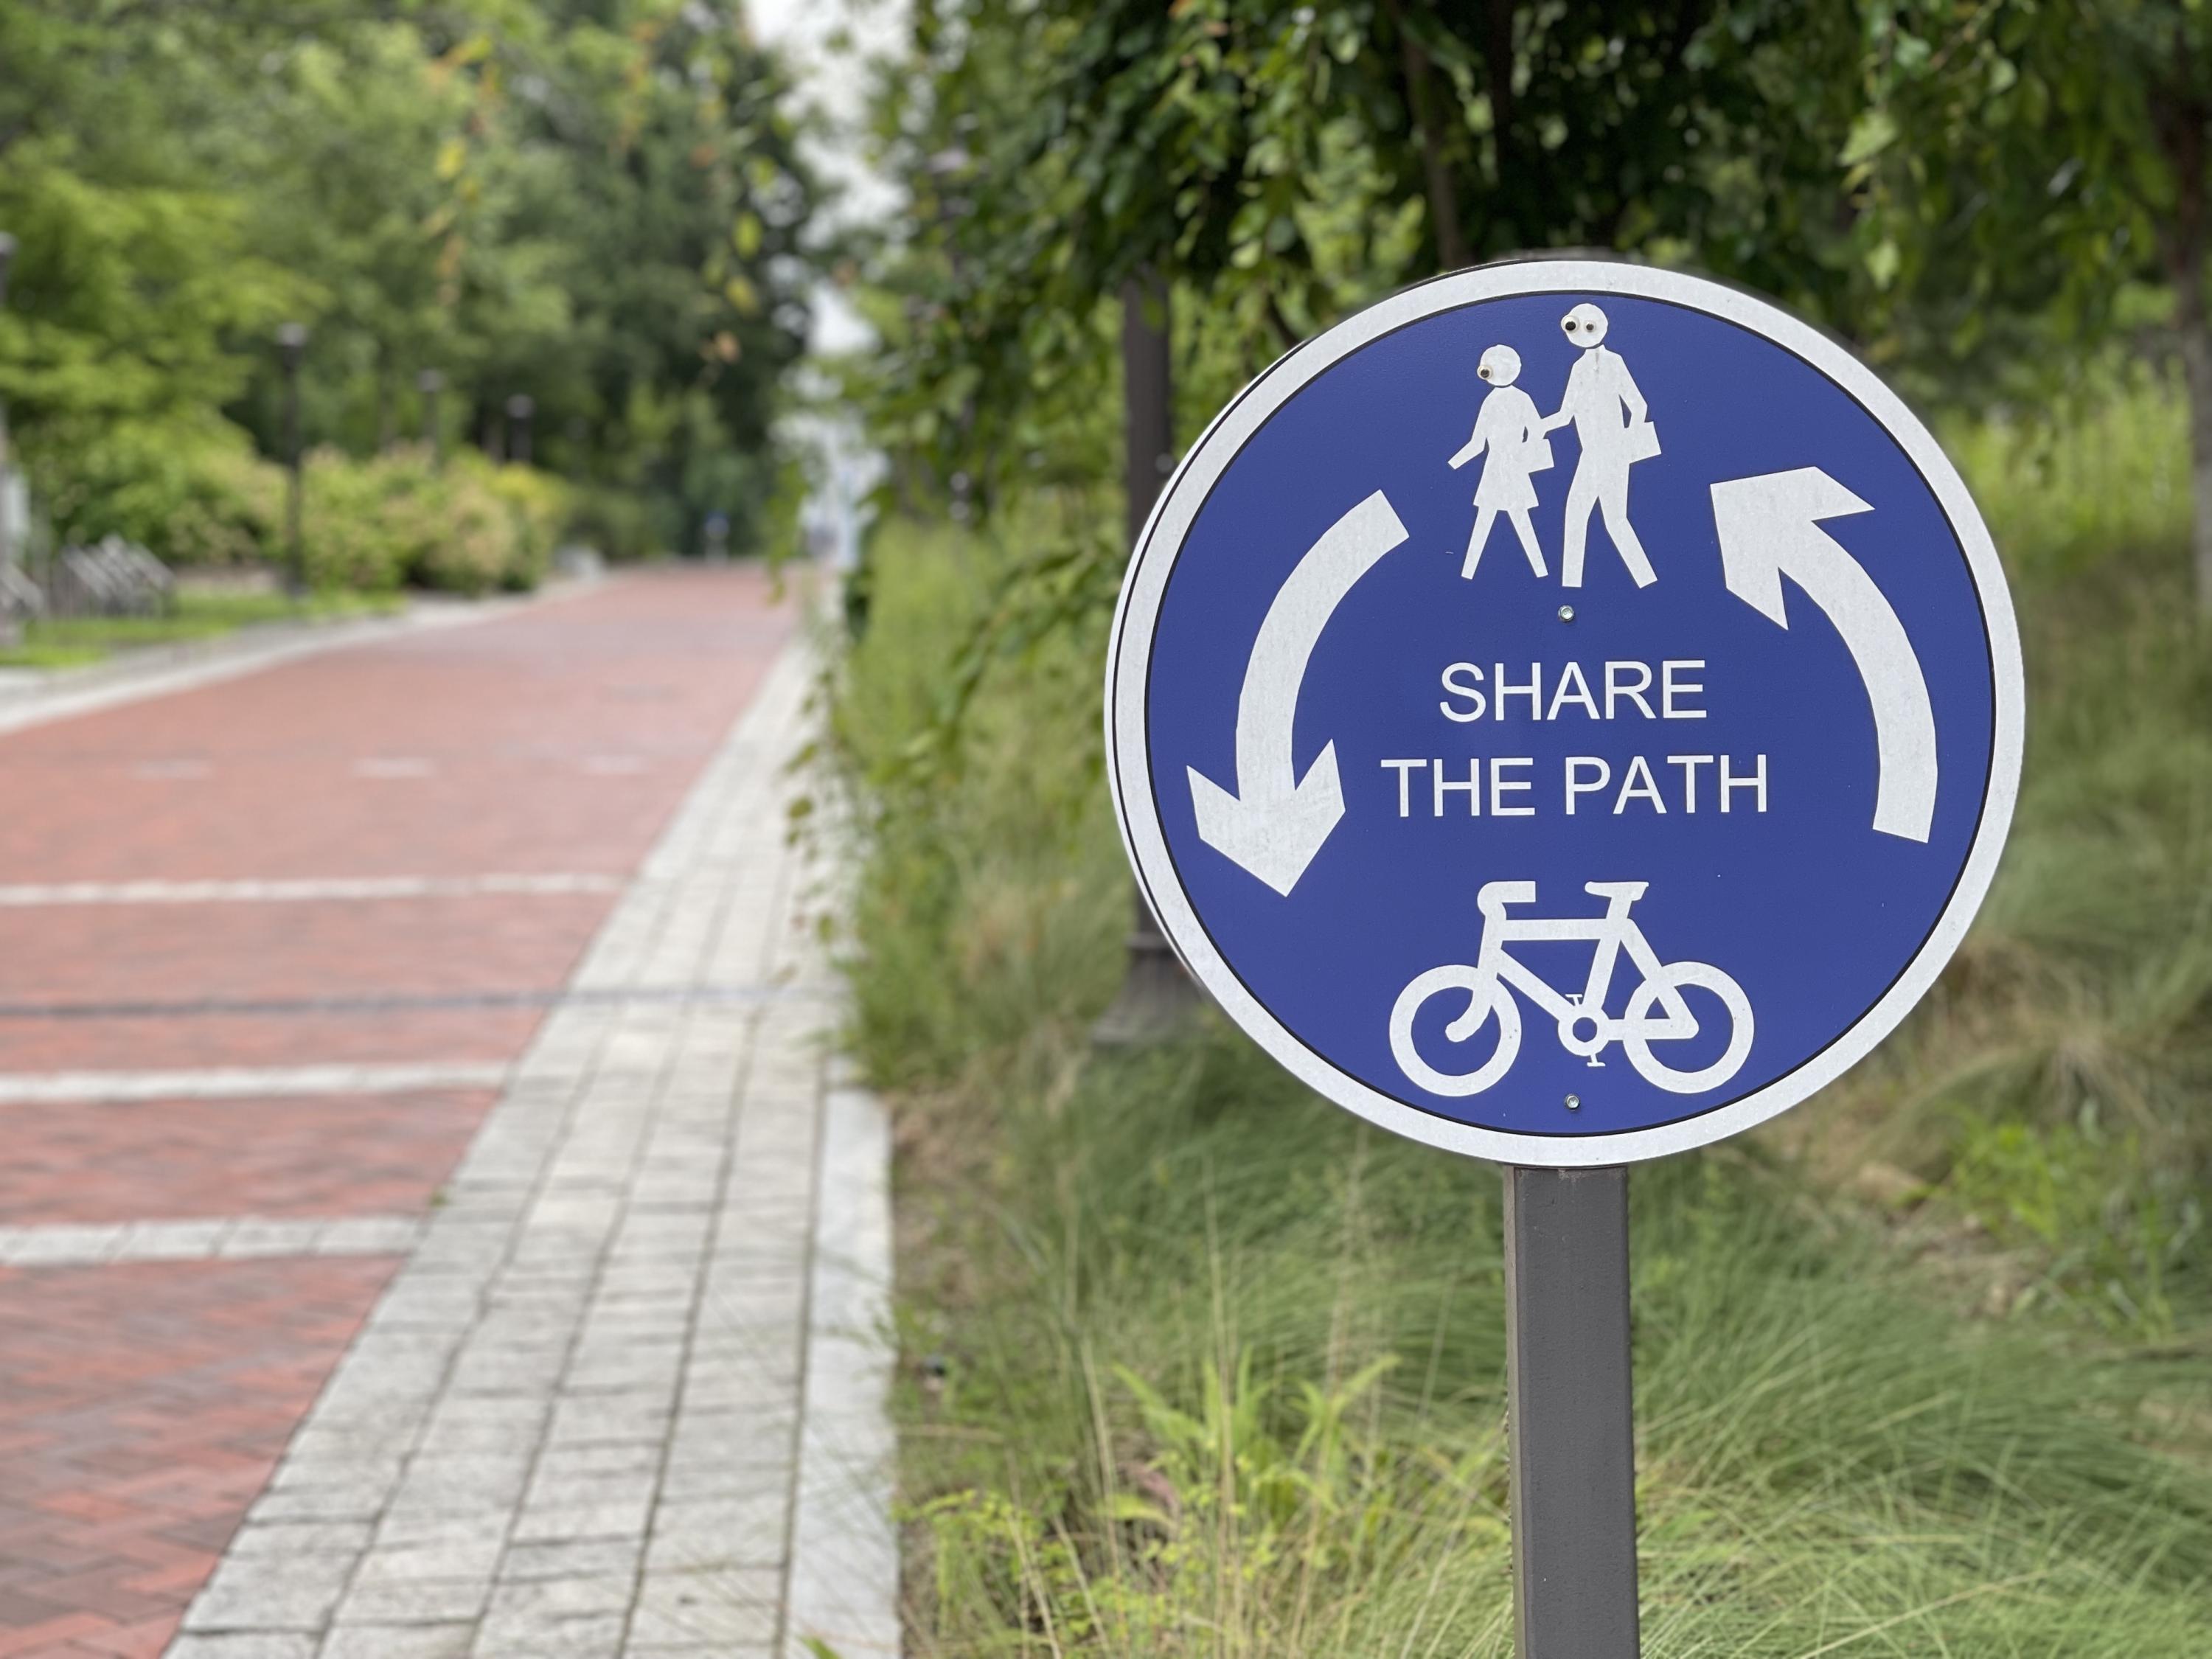 Georgia Tech has 1.5 miles of shared paths, or paths shared by riders and pedestrians, throughout campus.